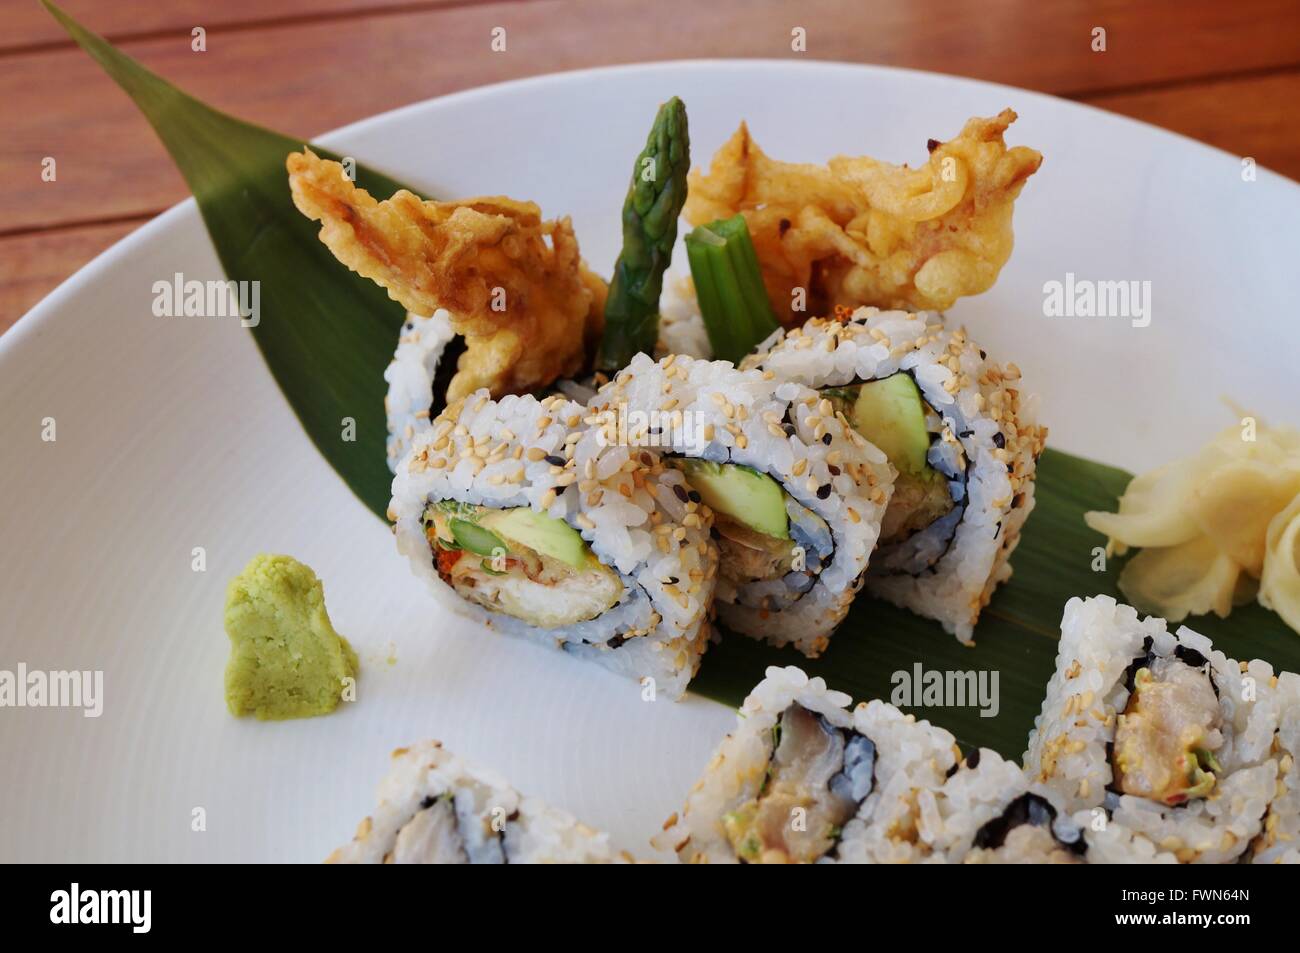 Soft Shell Crab Tempura Roll Sushi On A Plate Stock Photo Alamy,Posion Ivy Dc